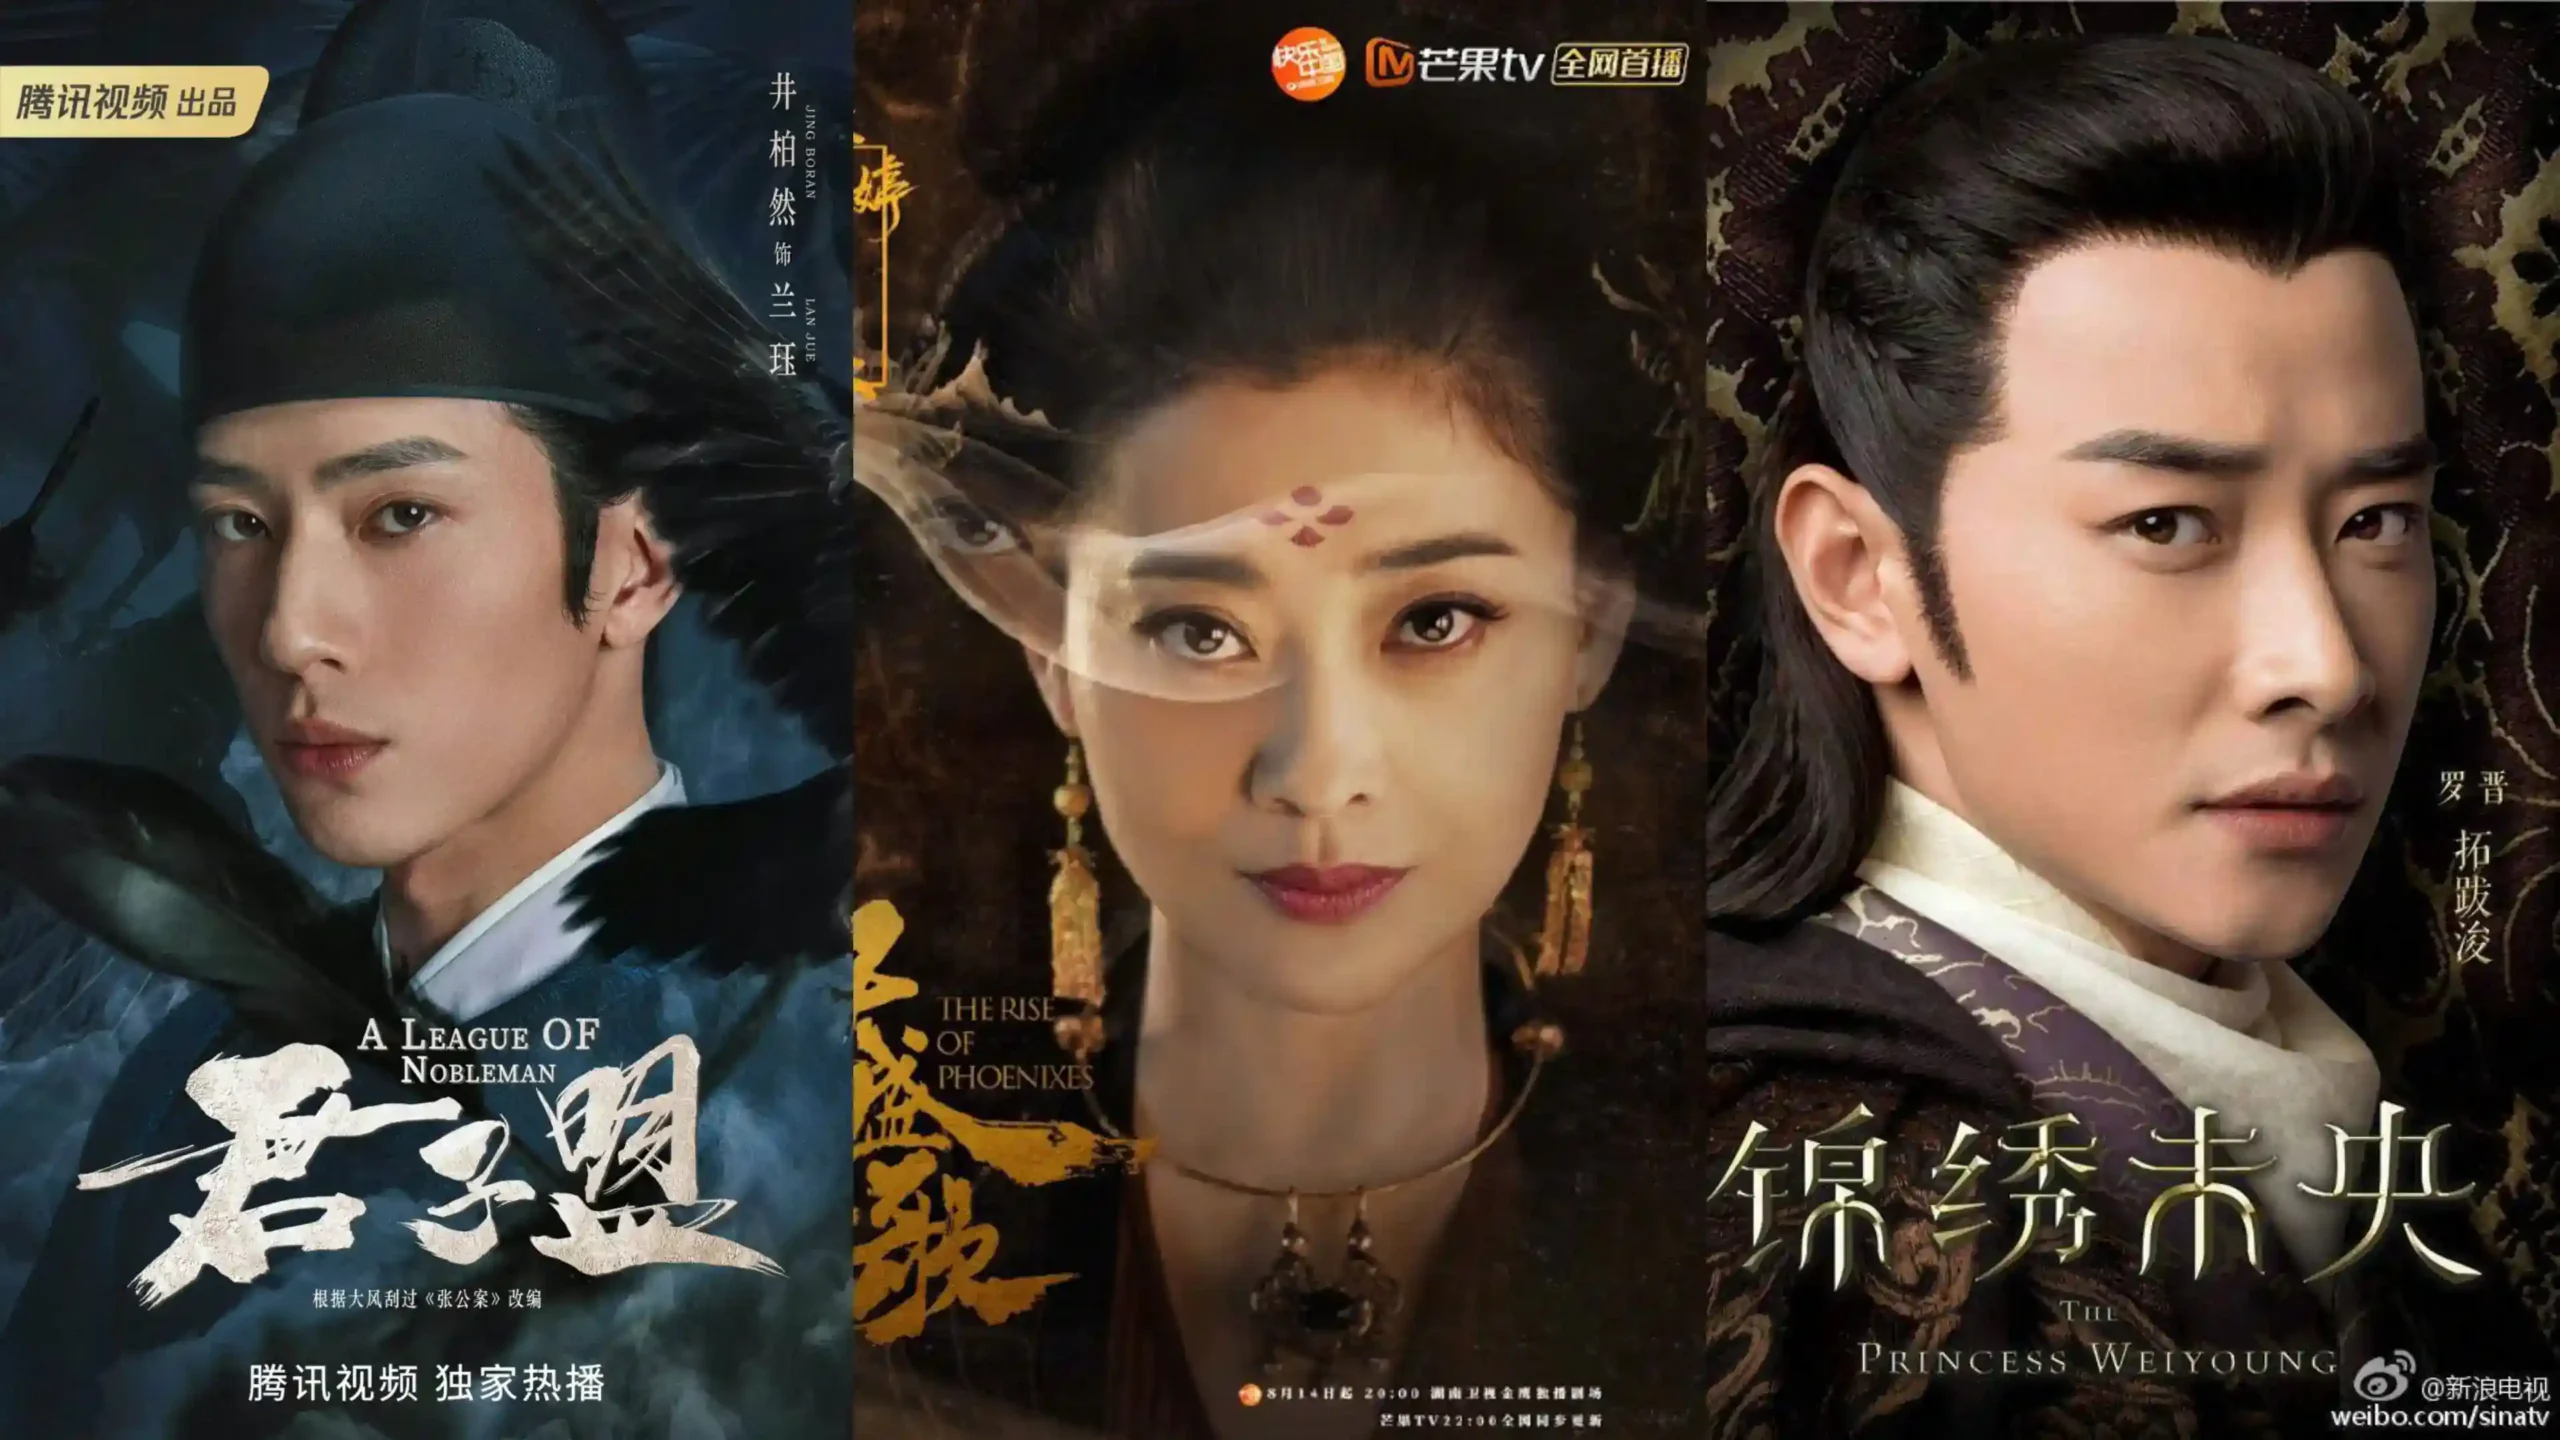 Fantastic historical Chinese dramas to watch scaled